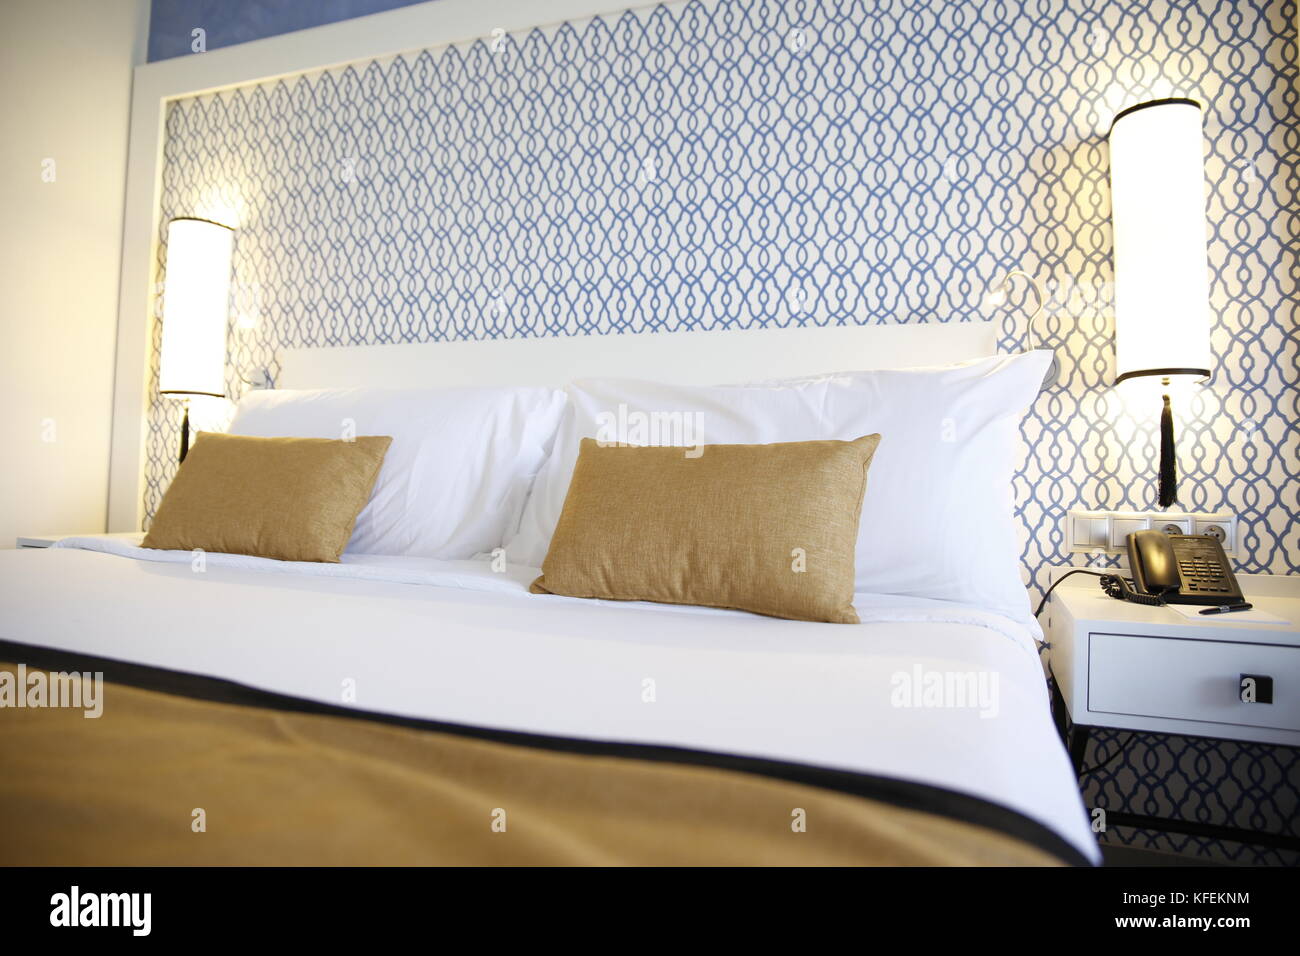 Hotel bedroom, double bed and pillows, blue patterns bedhead,  saidia, Morocco Stock Photo